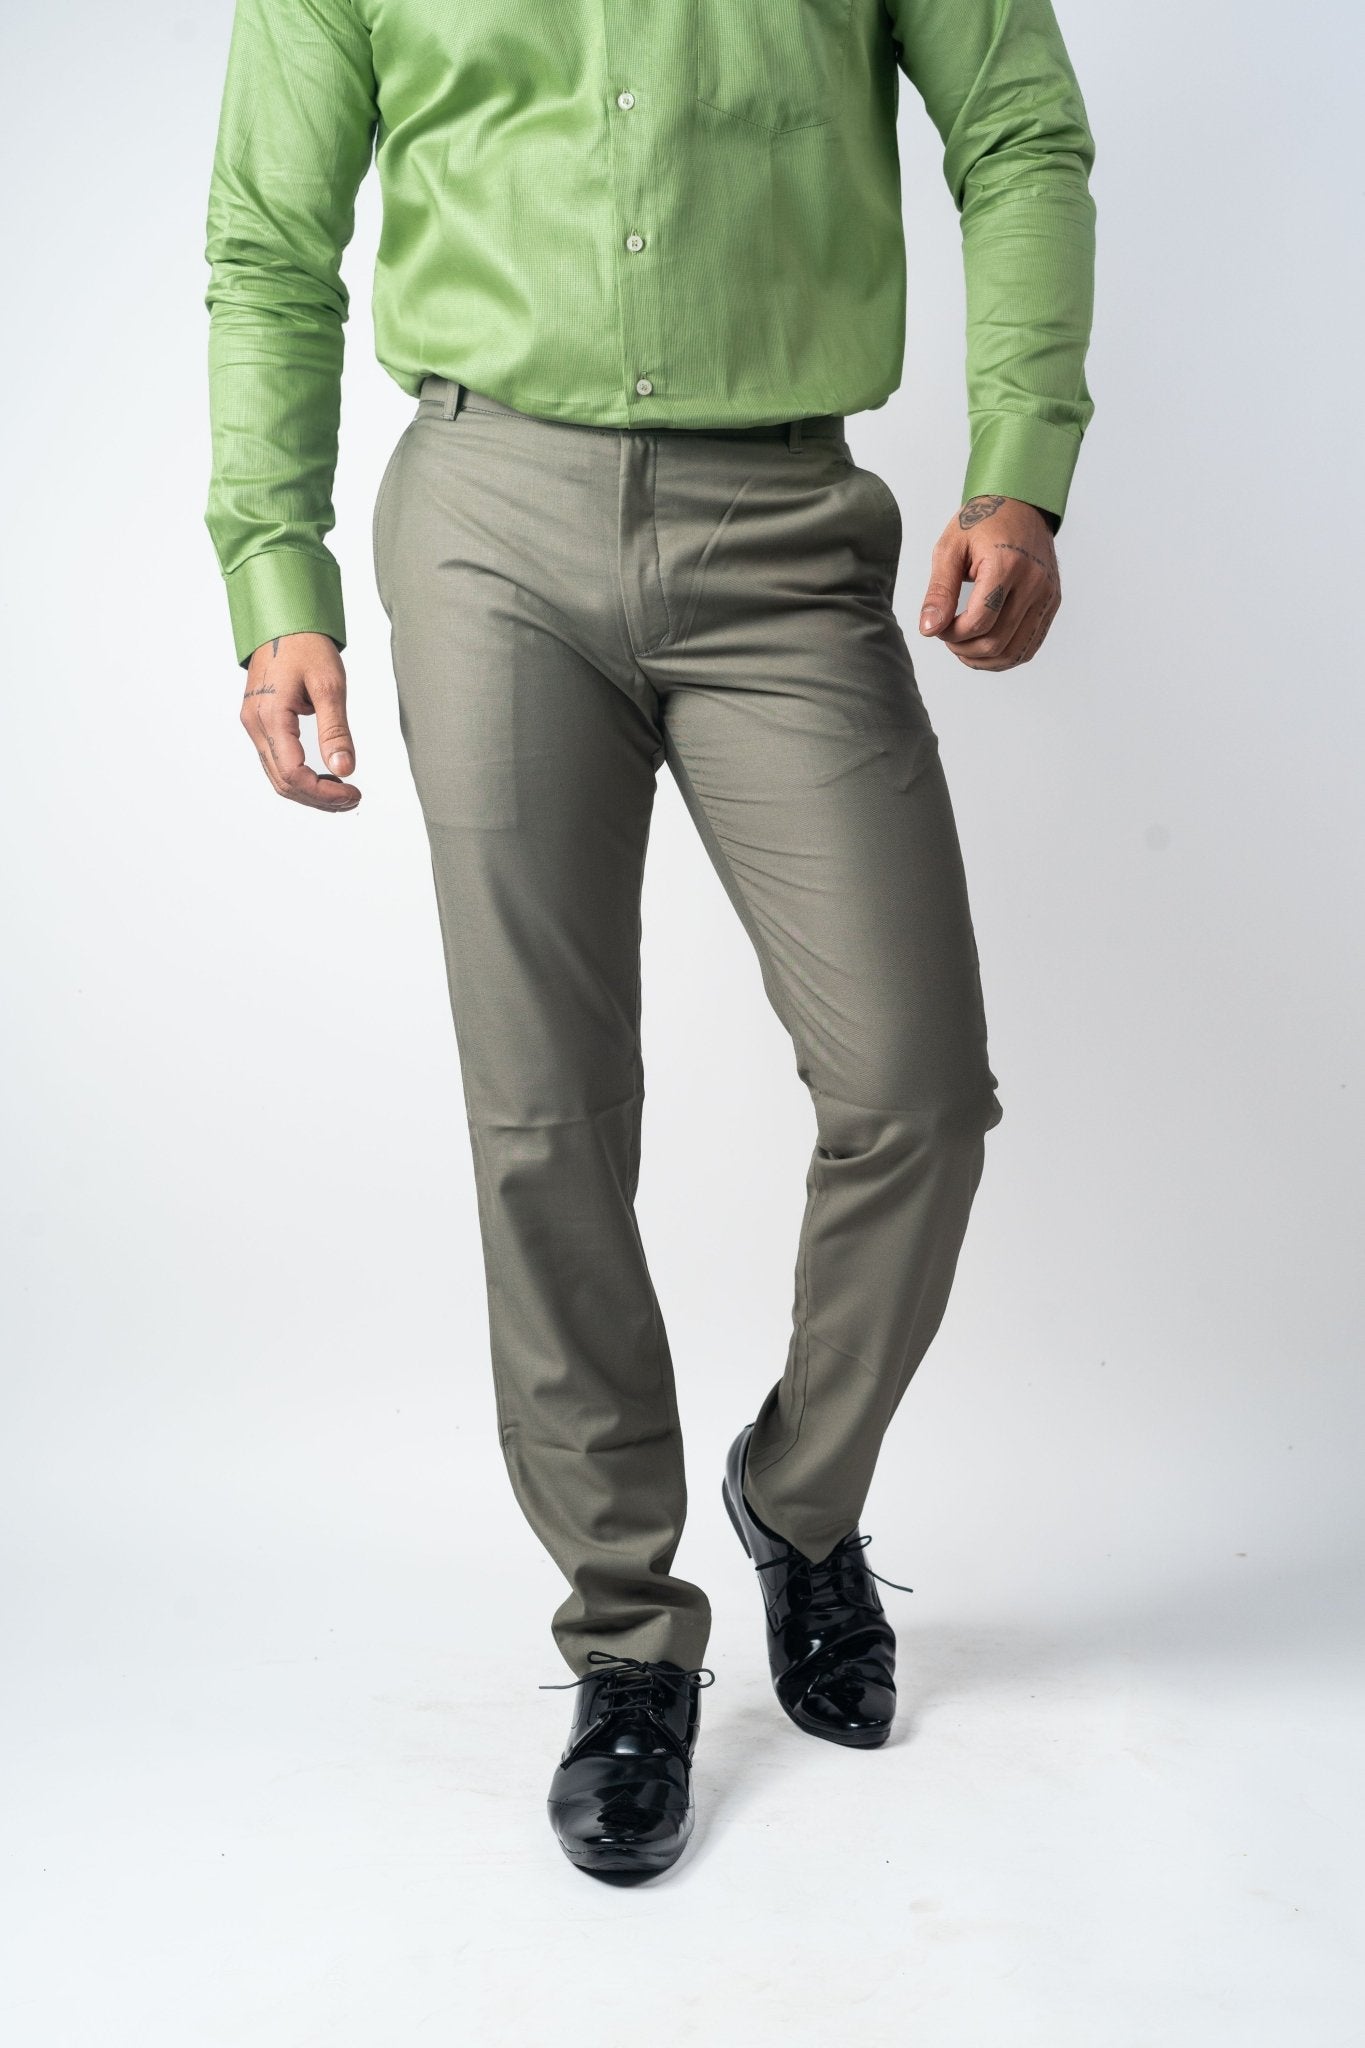 Black Shirt Jacket with Dark Green Pants Outfits For Men (34 ideas &  outfits) | Lookastic